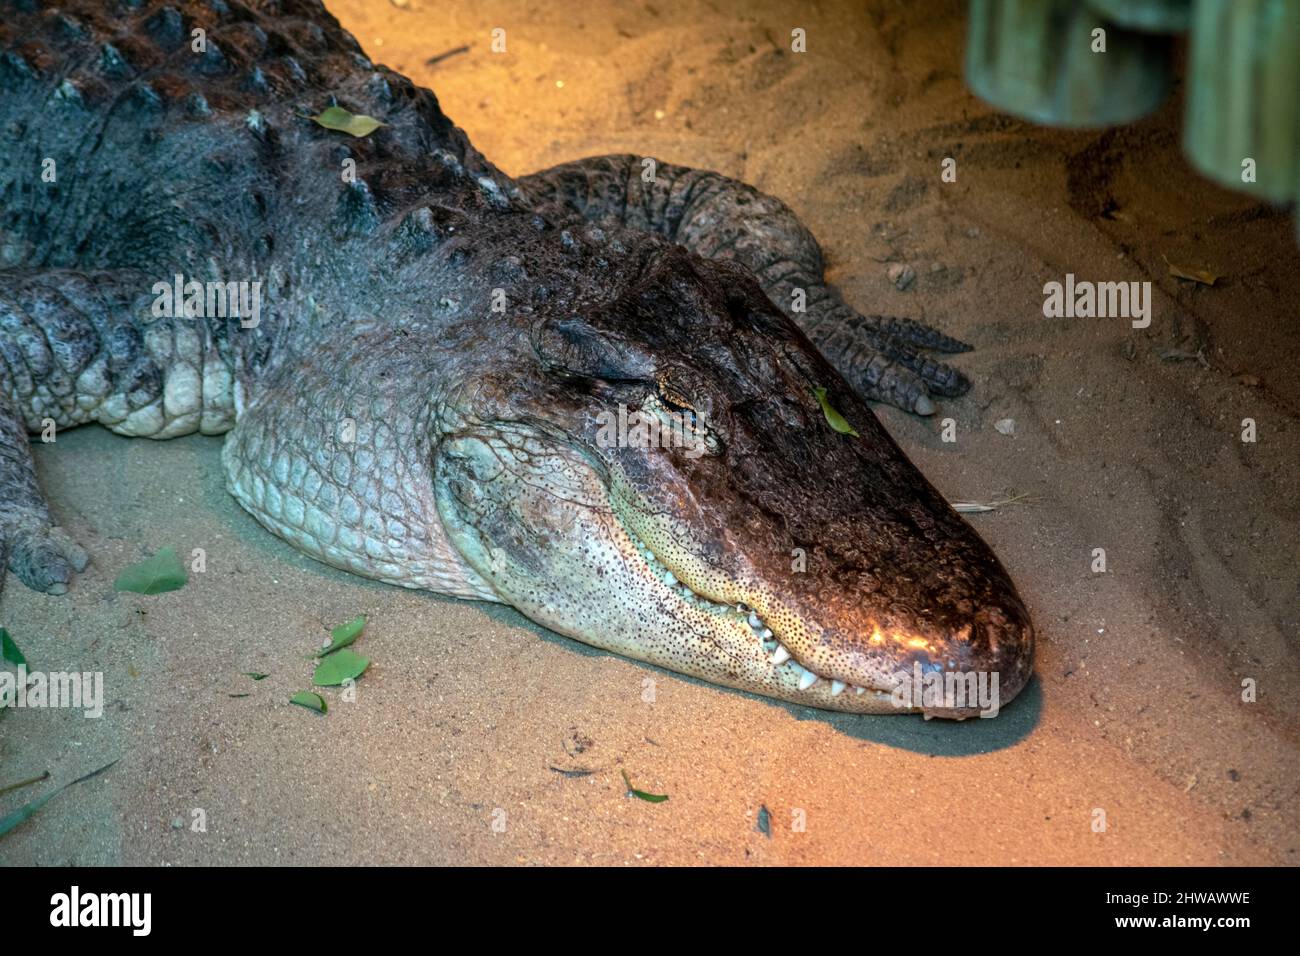 The American alligator (Alligator mississippiensis), sometimes referred to colloquially as a gator or common alligator, is a large crocodilian reptile Stock Photo